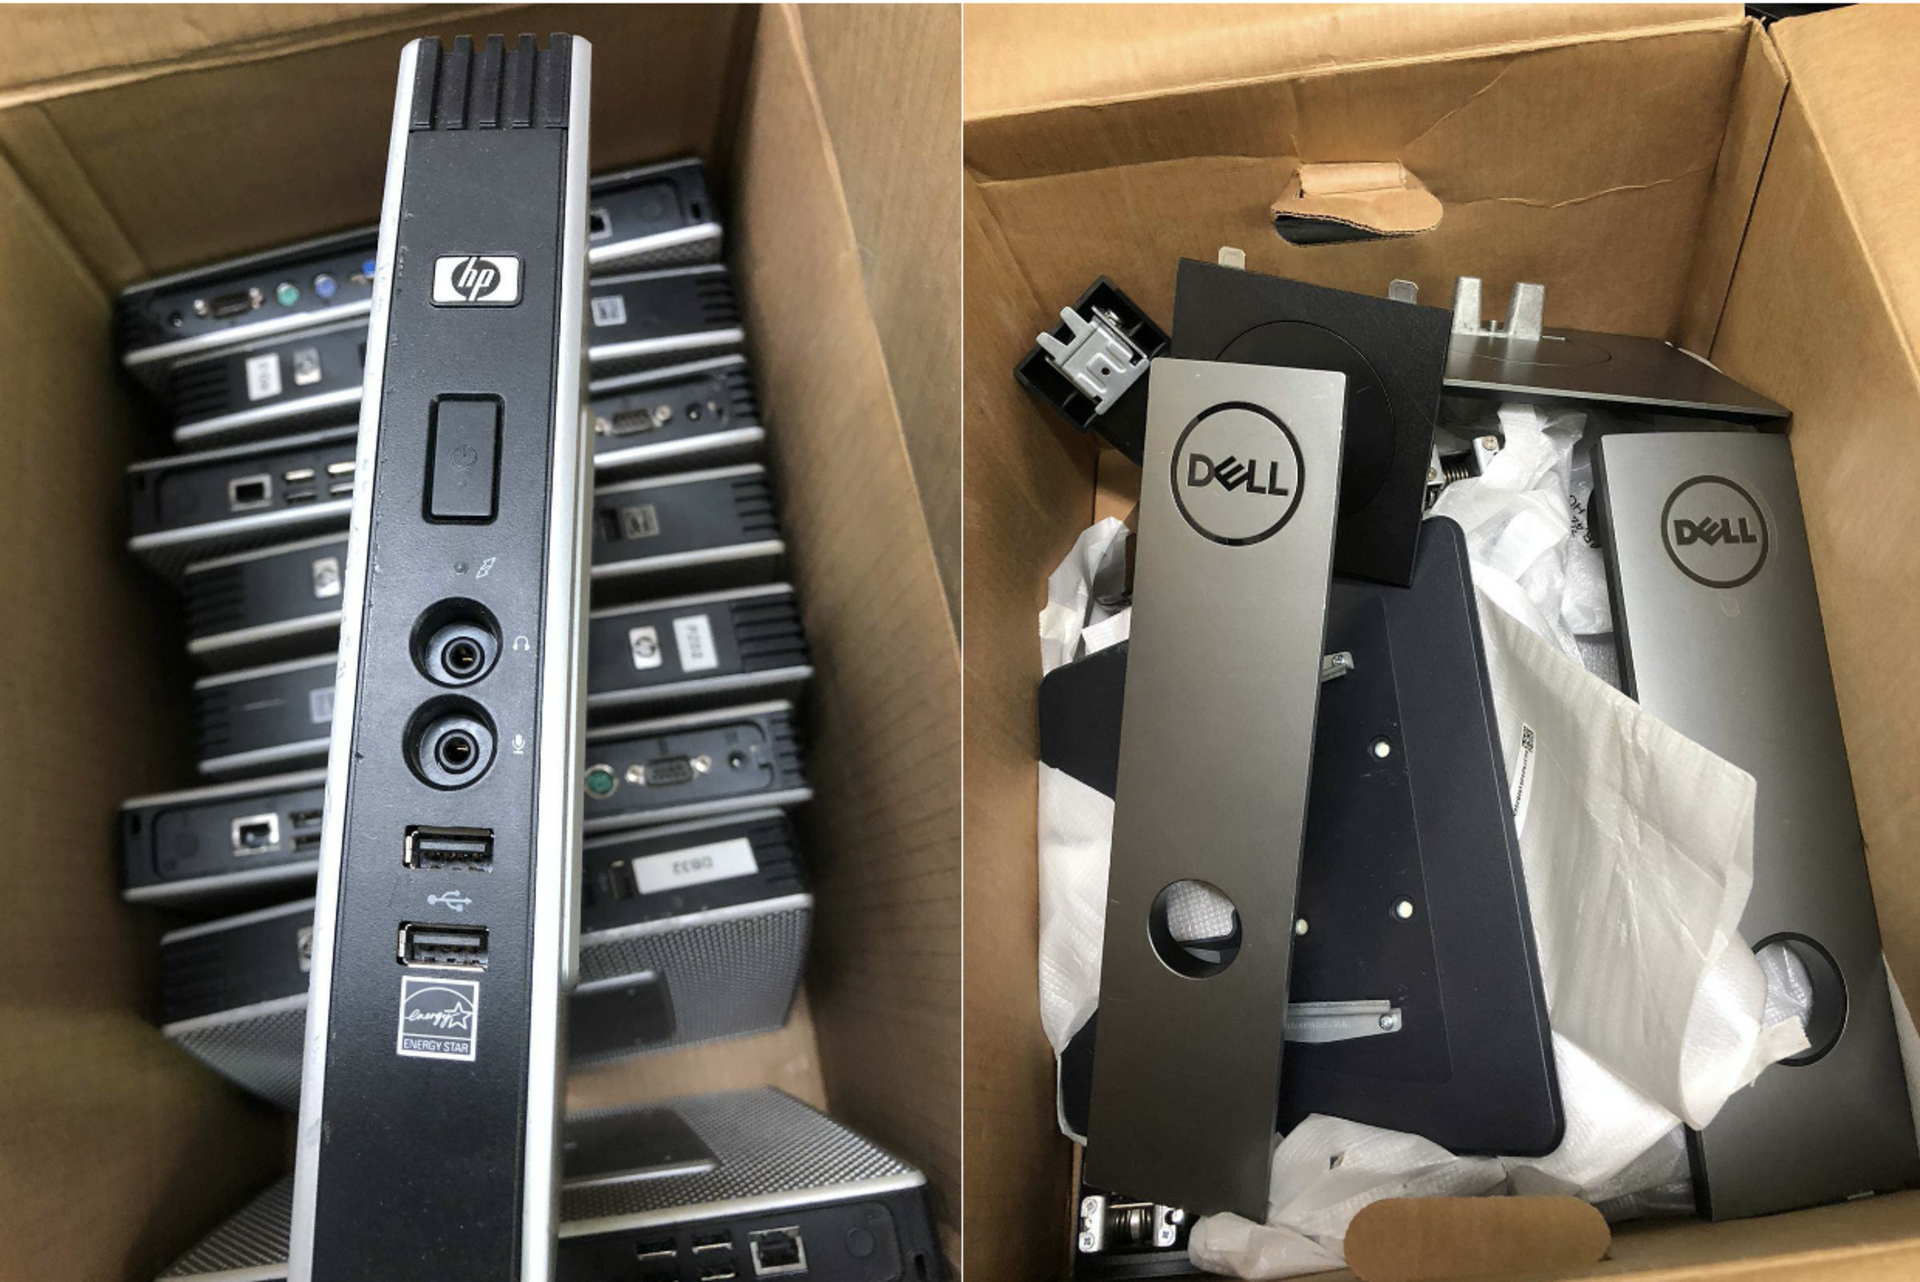 Mini HP Towers, and New Dell Monitor Stands